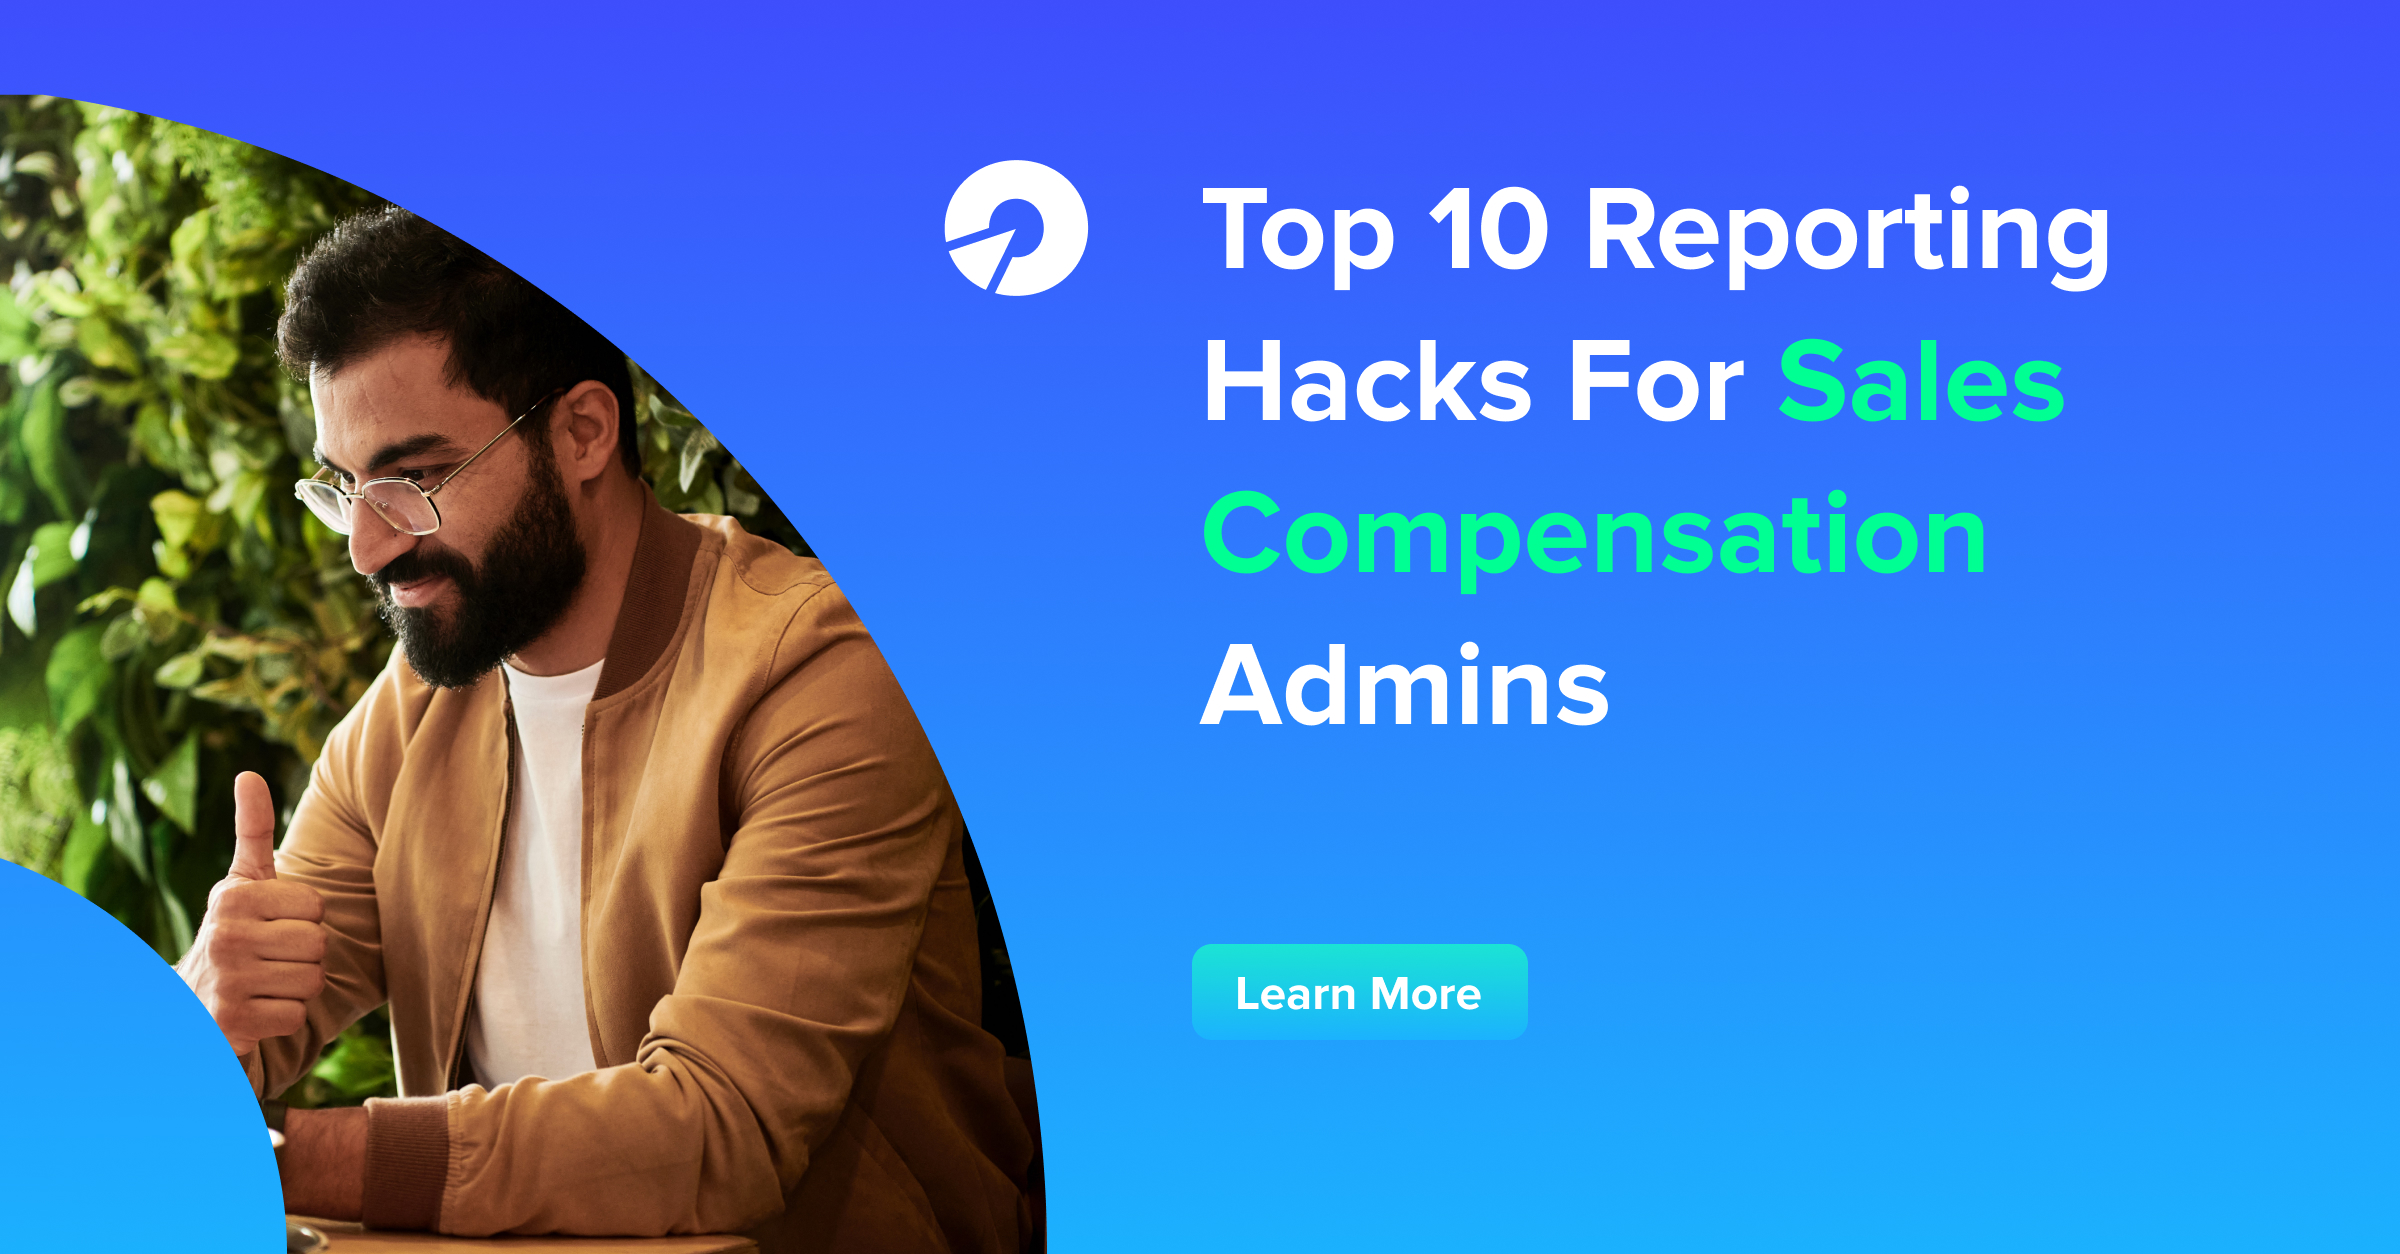 Top 10 Reporting Hacks For Sales Compensation Admins